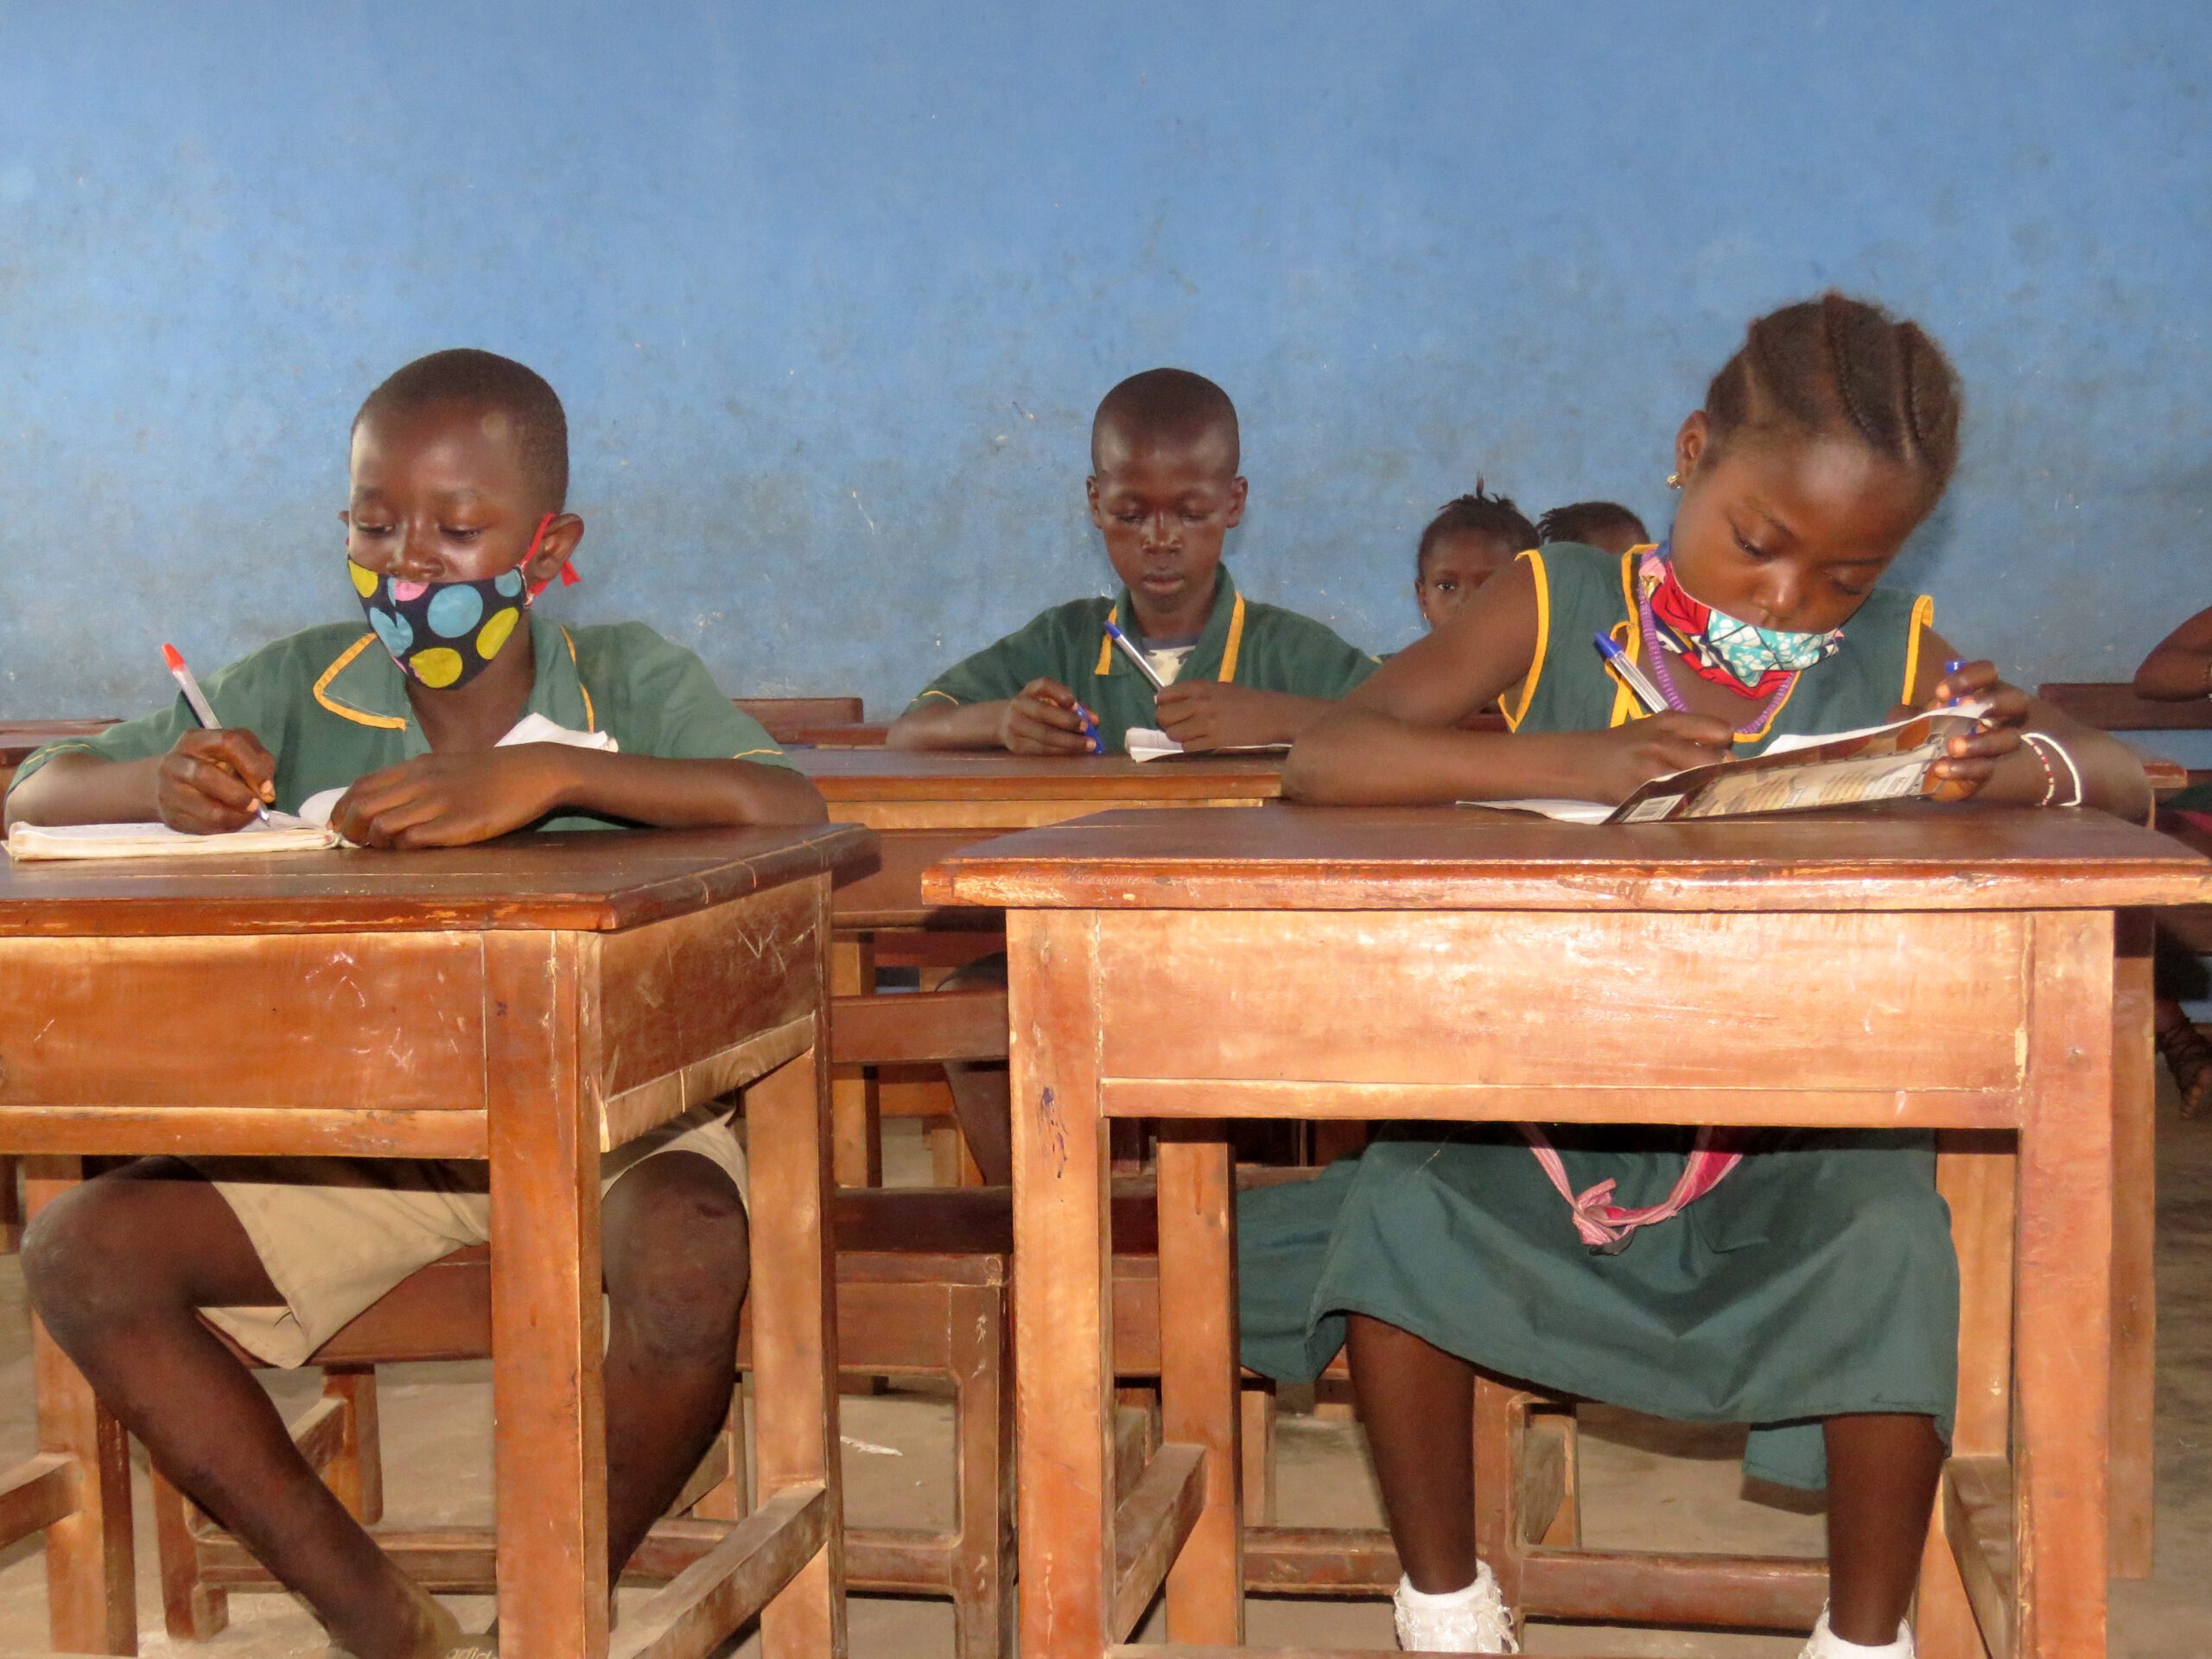 Fatima, 11, and her friends learn in class at their new school